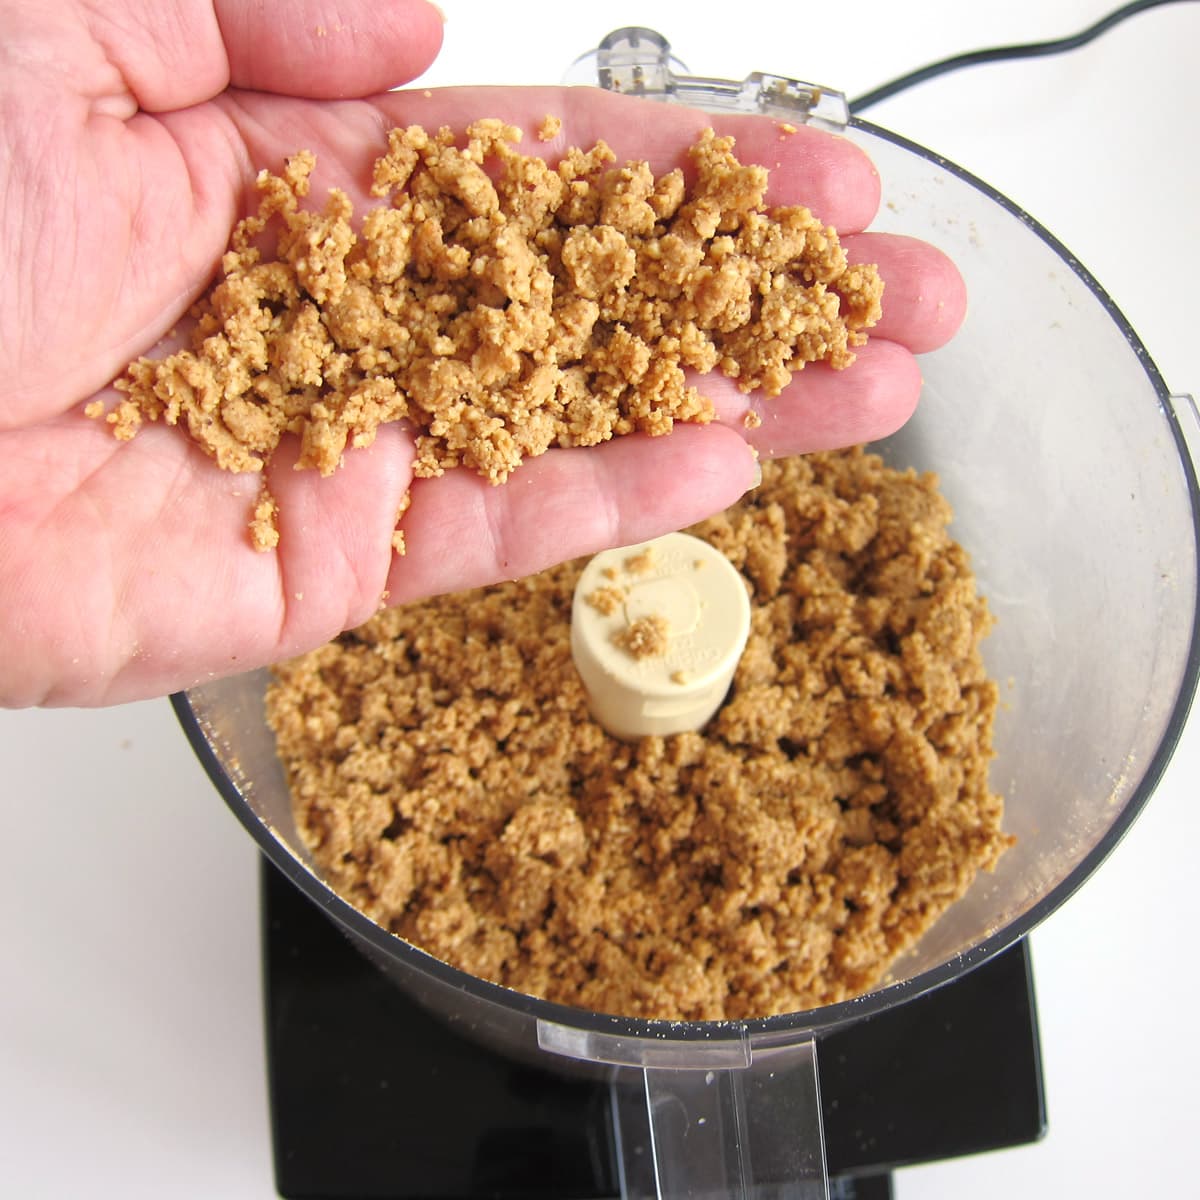 grinding peanuts into peanut butter using a food processor.